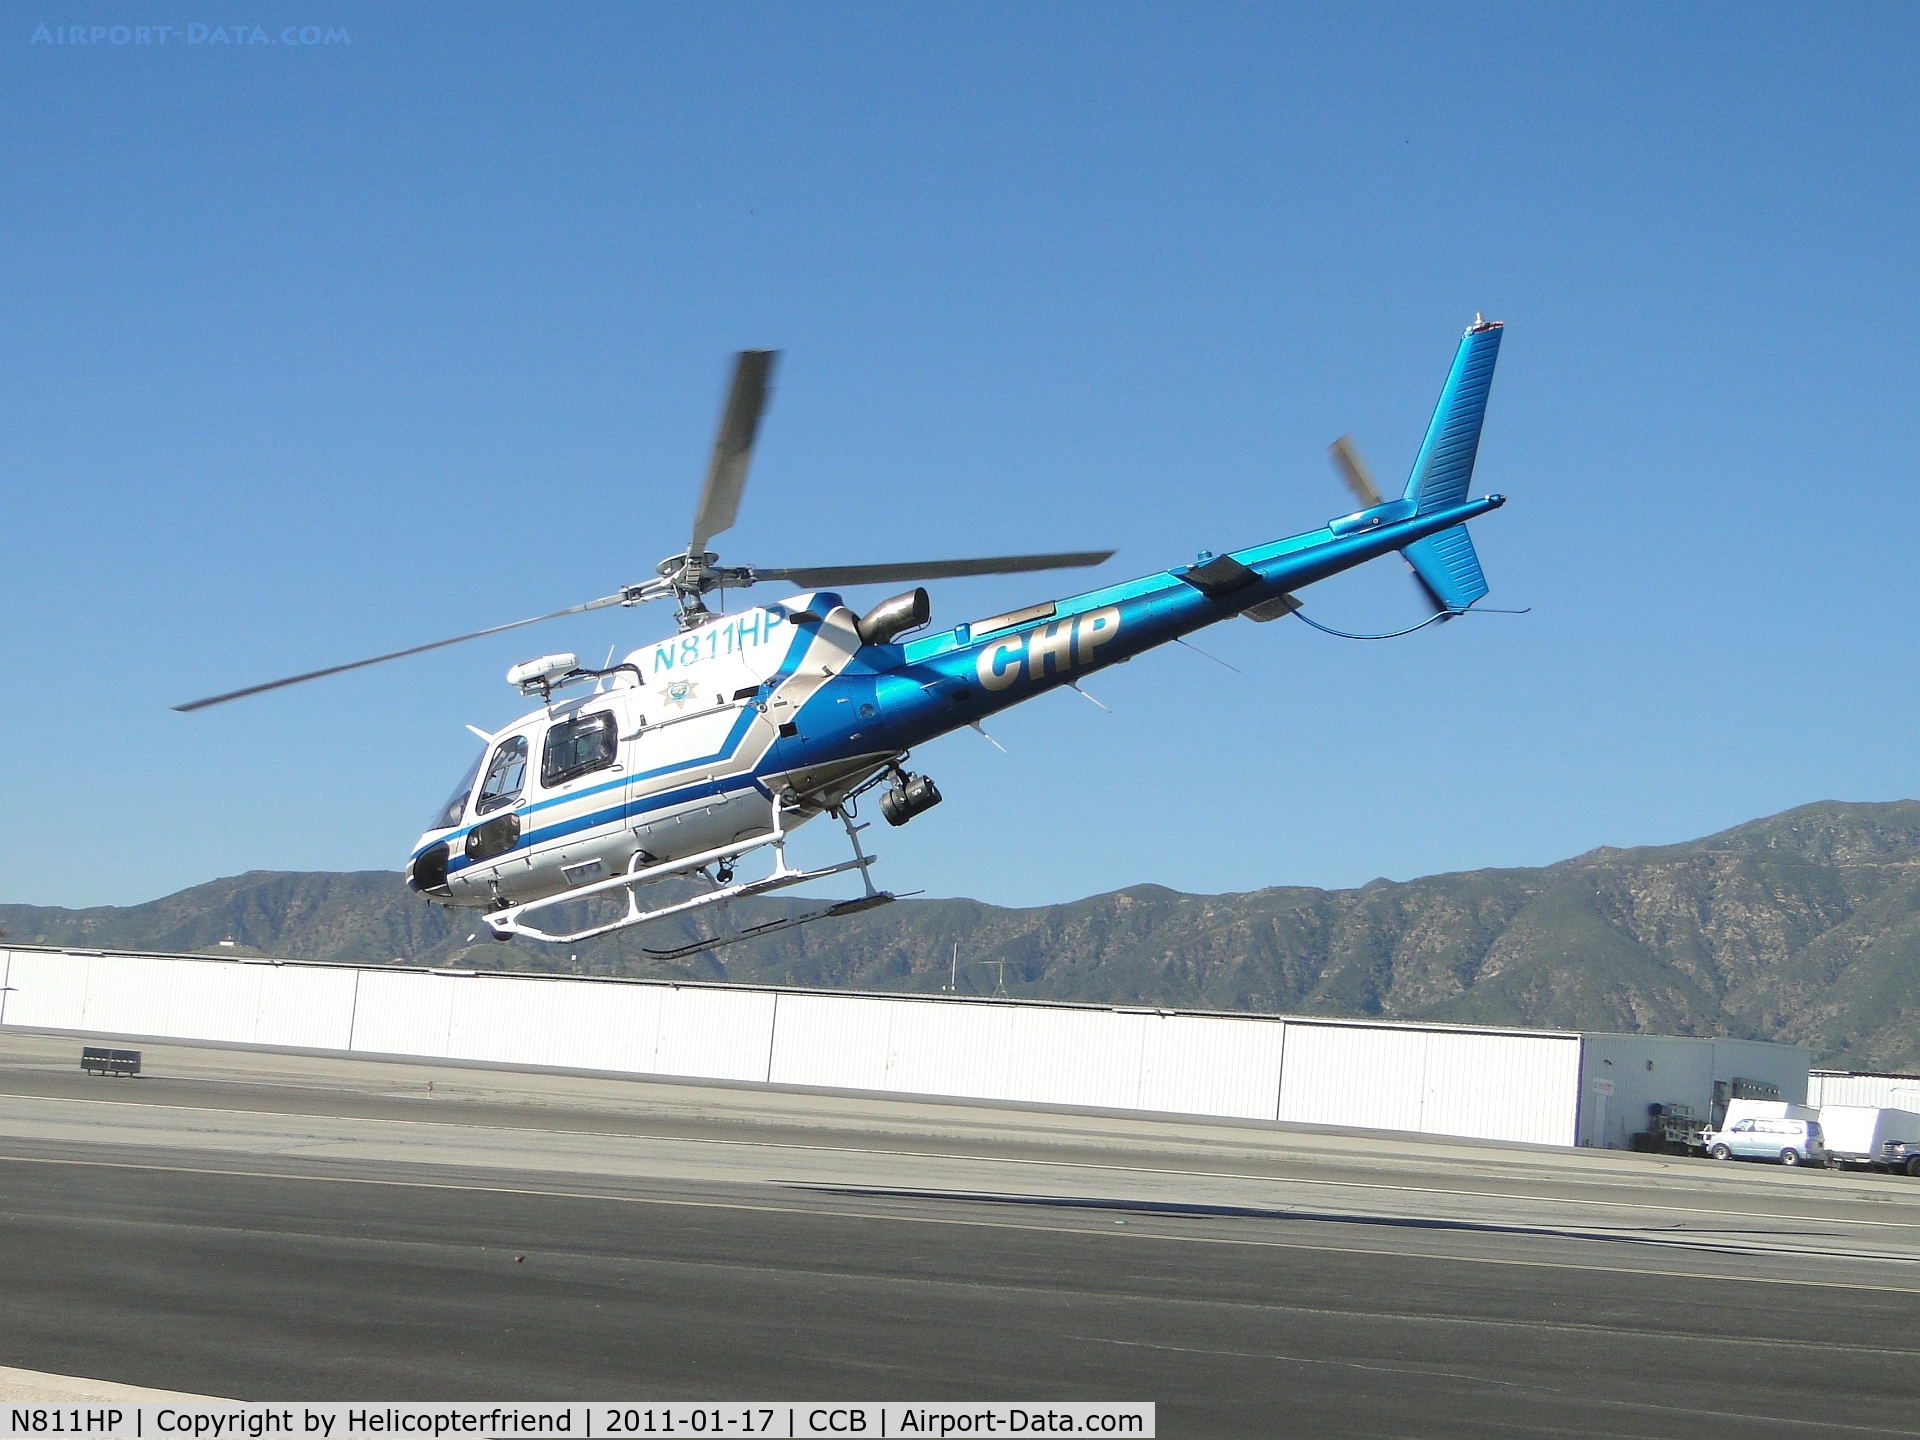 N811HP, 2001 Eurocopter AS-350B-3 Ecureuil Ecureuil C/N 3404, Nose down and forward flight to depart